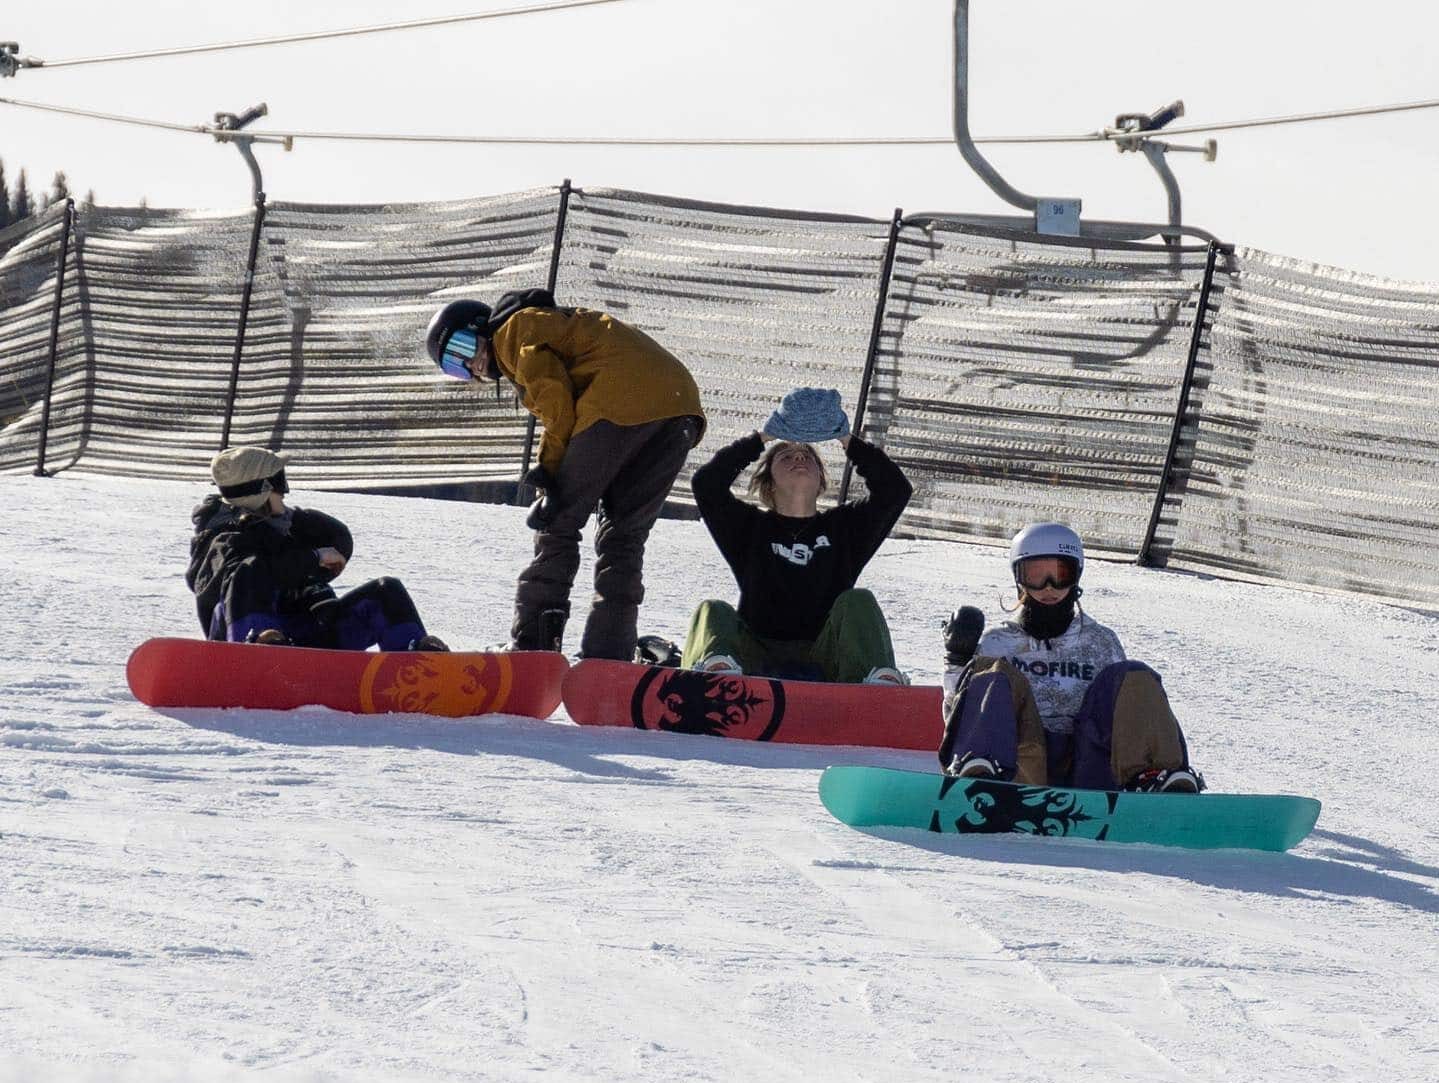 4 snowboarders sitting with their Never Summer board facing the camera at the bottom of a ski slope